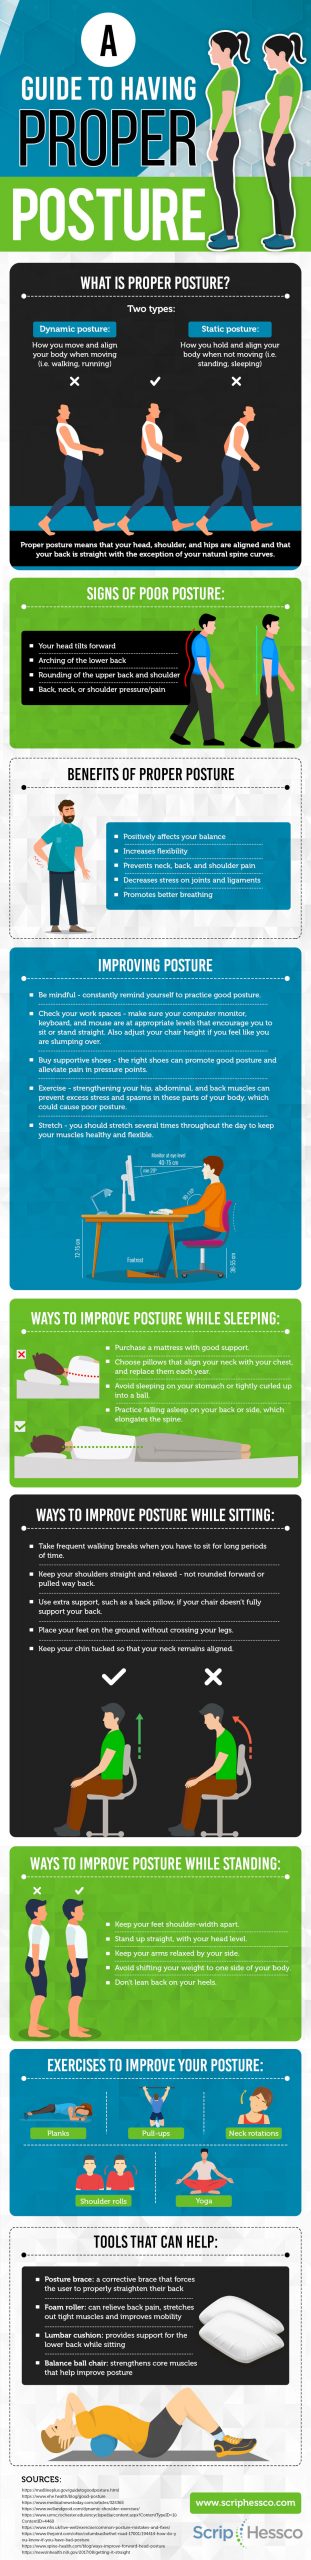 Guide to Having a Proper Posture